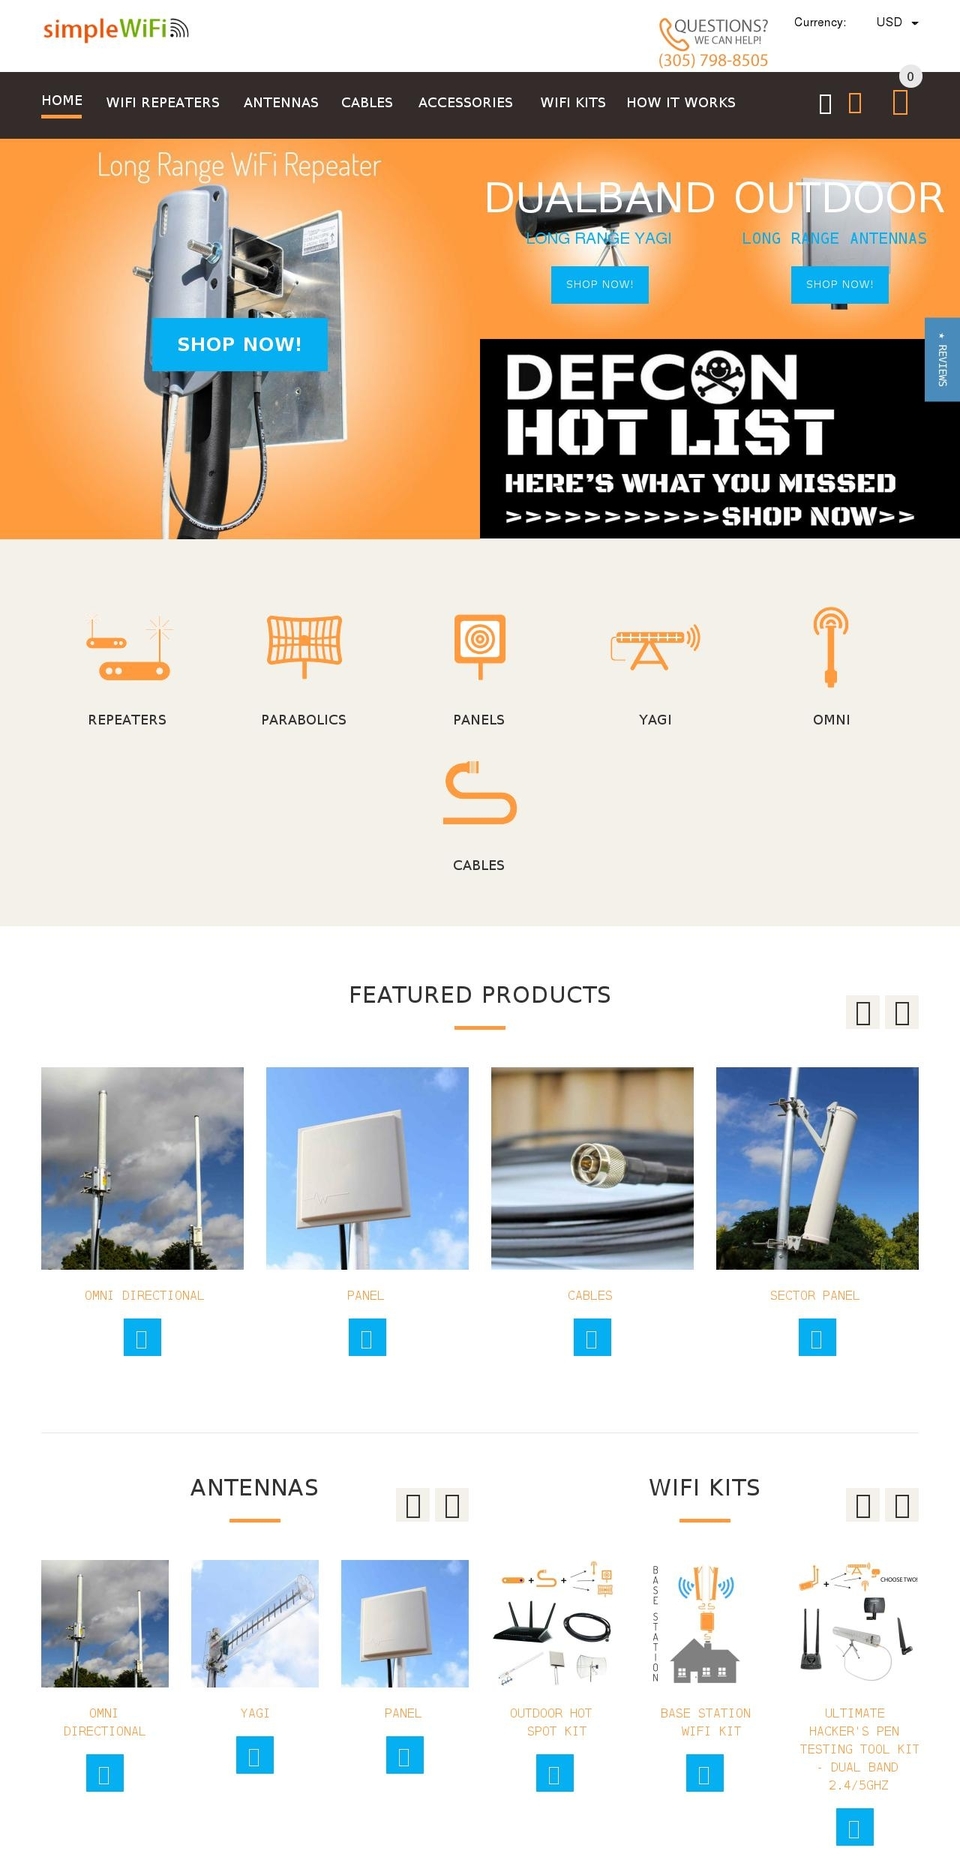 yourstore-v2-1-3 Shopify theme site example simplewifi.com